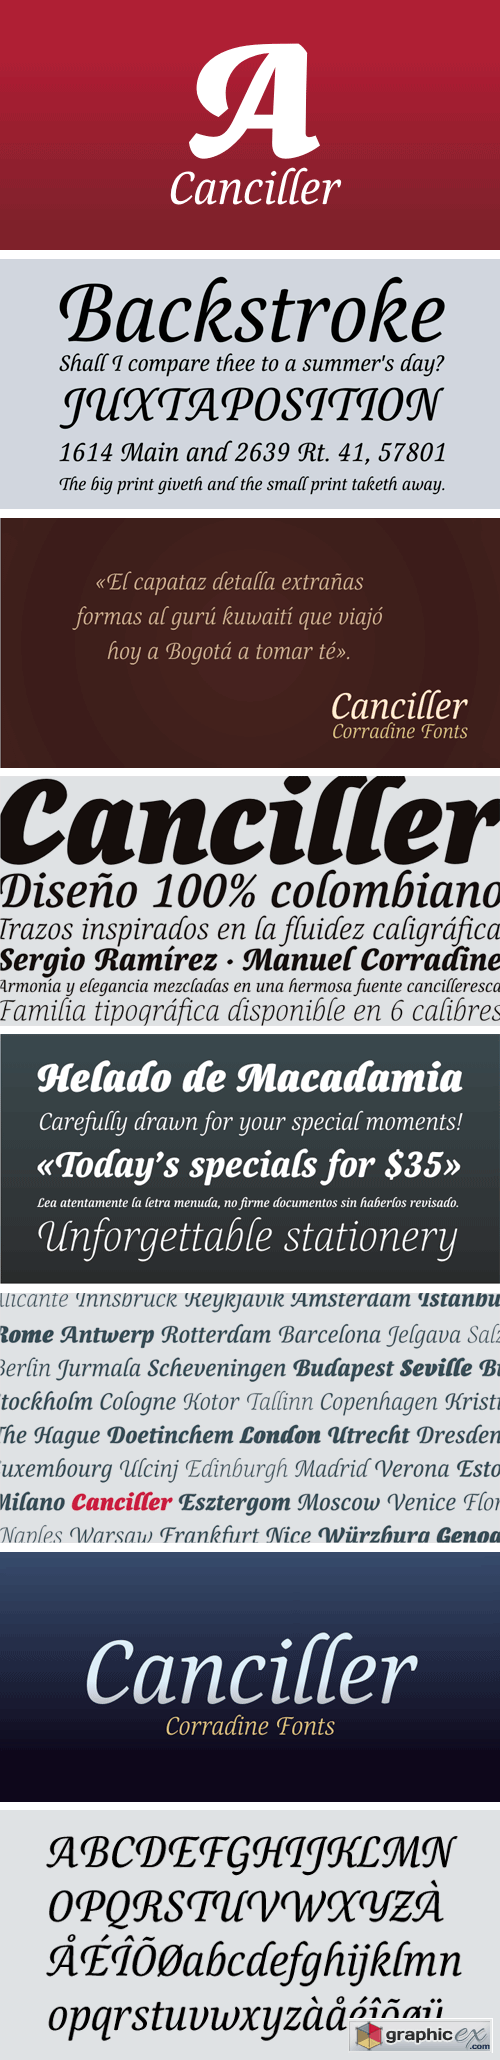 Canciller Font Family - 6 Fonts for $80